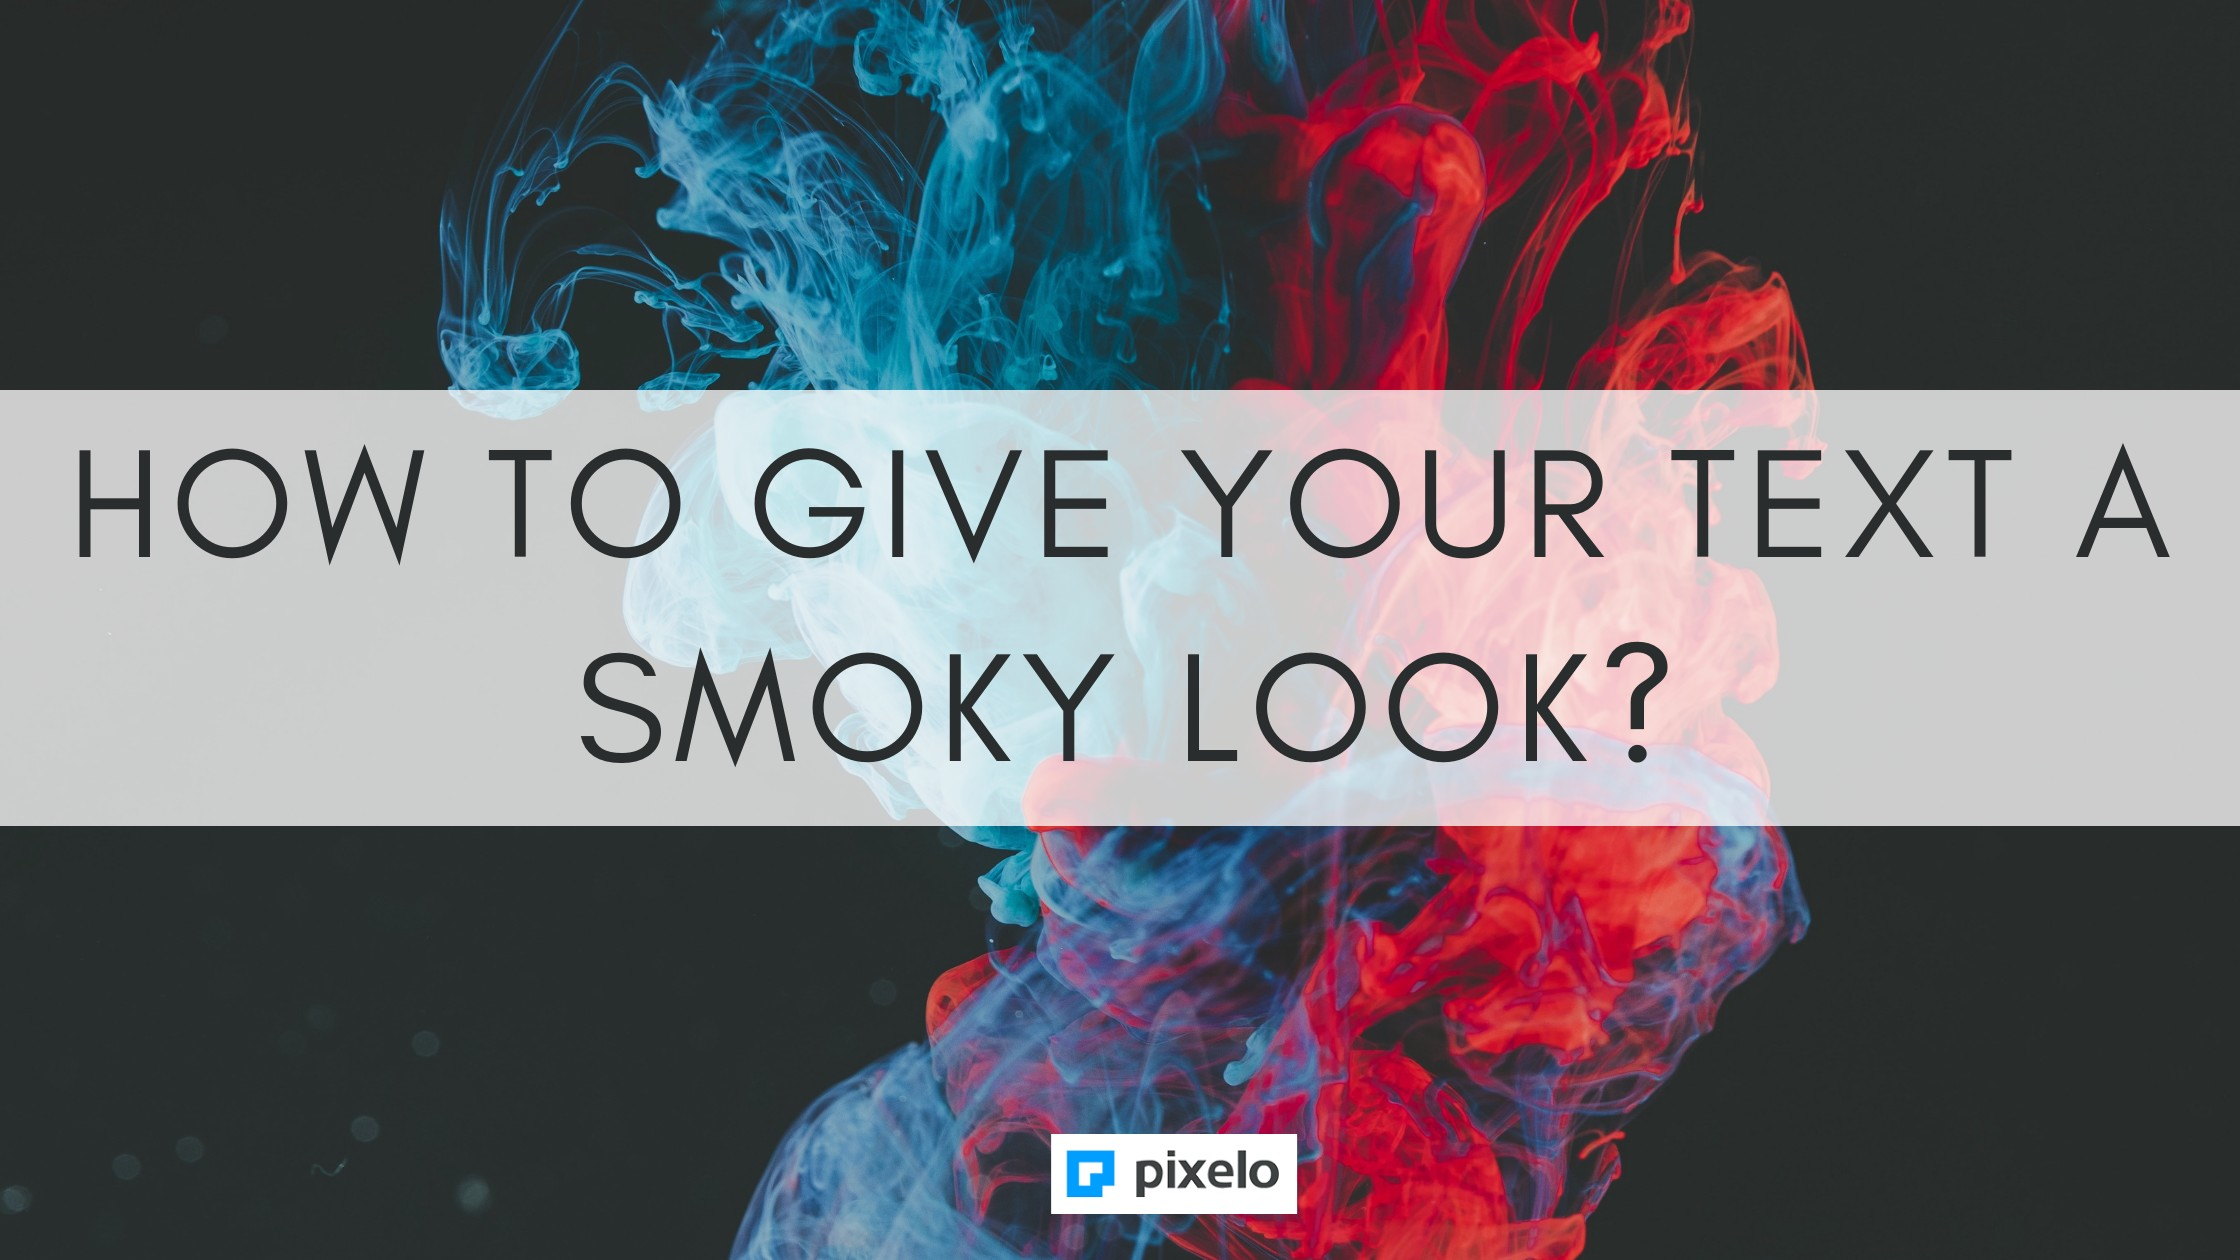 How To Give Your Text A Smoky Look?